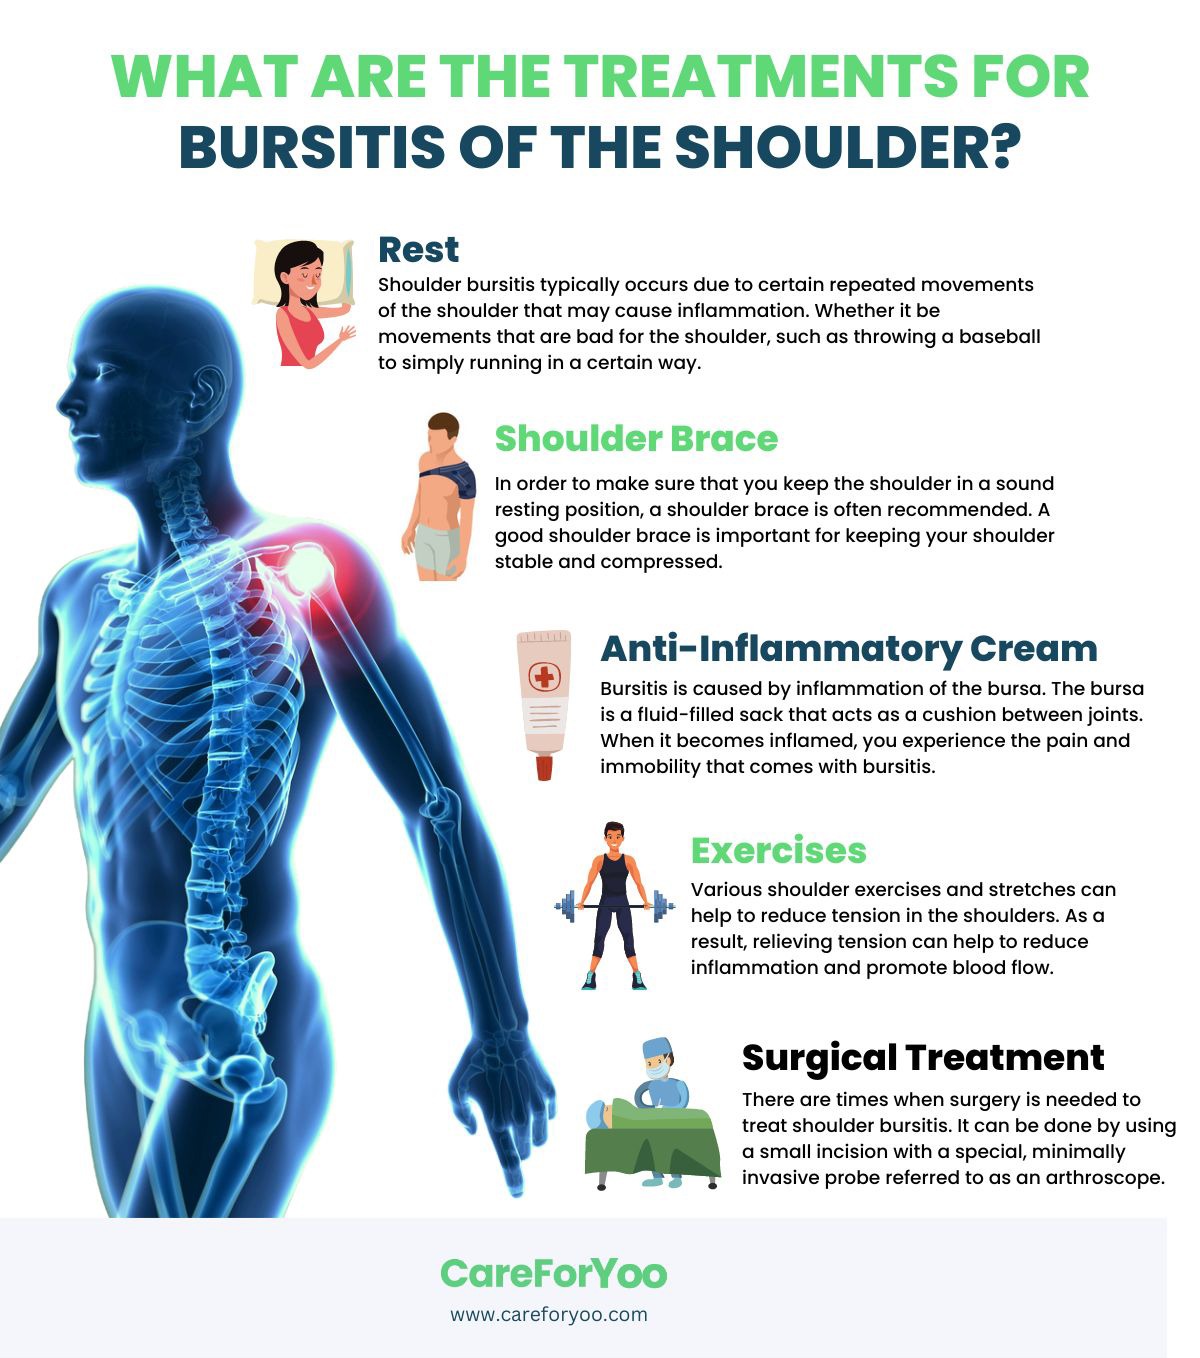 What are the Treatments for Bursitis of the Shoulder